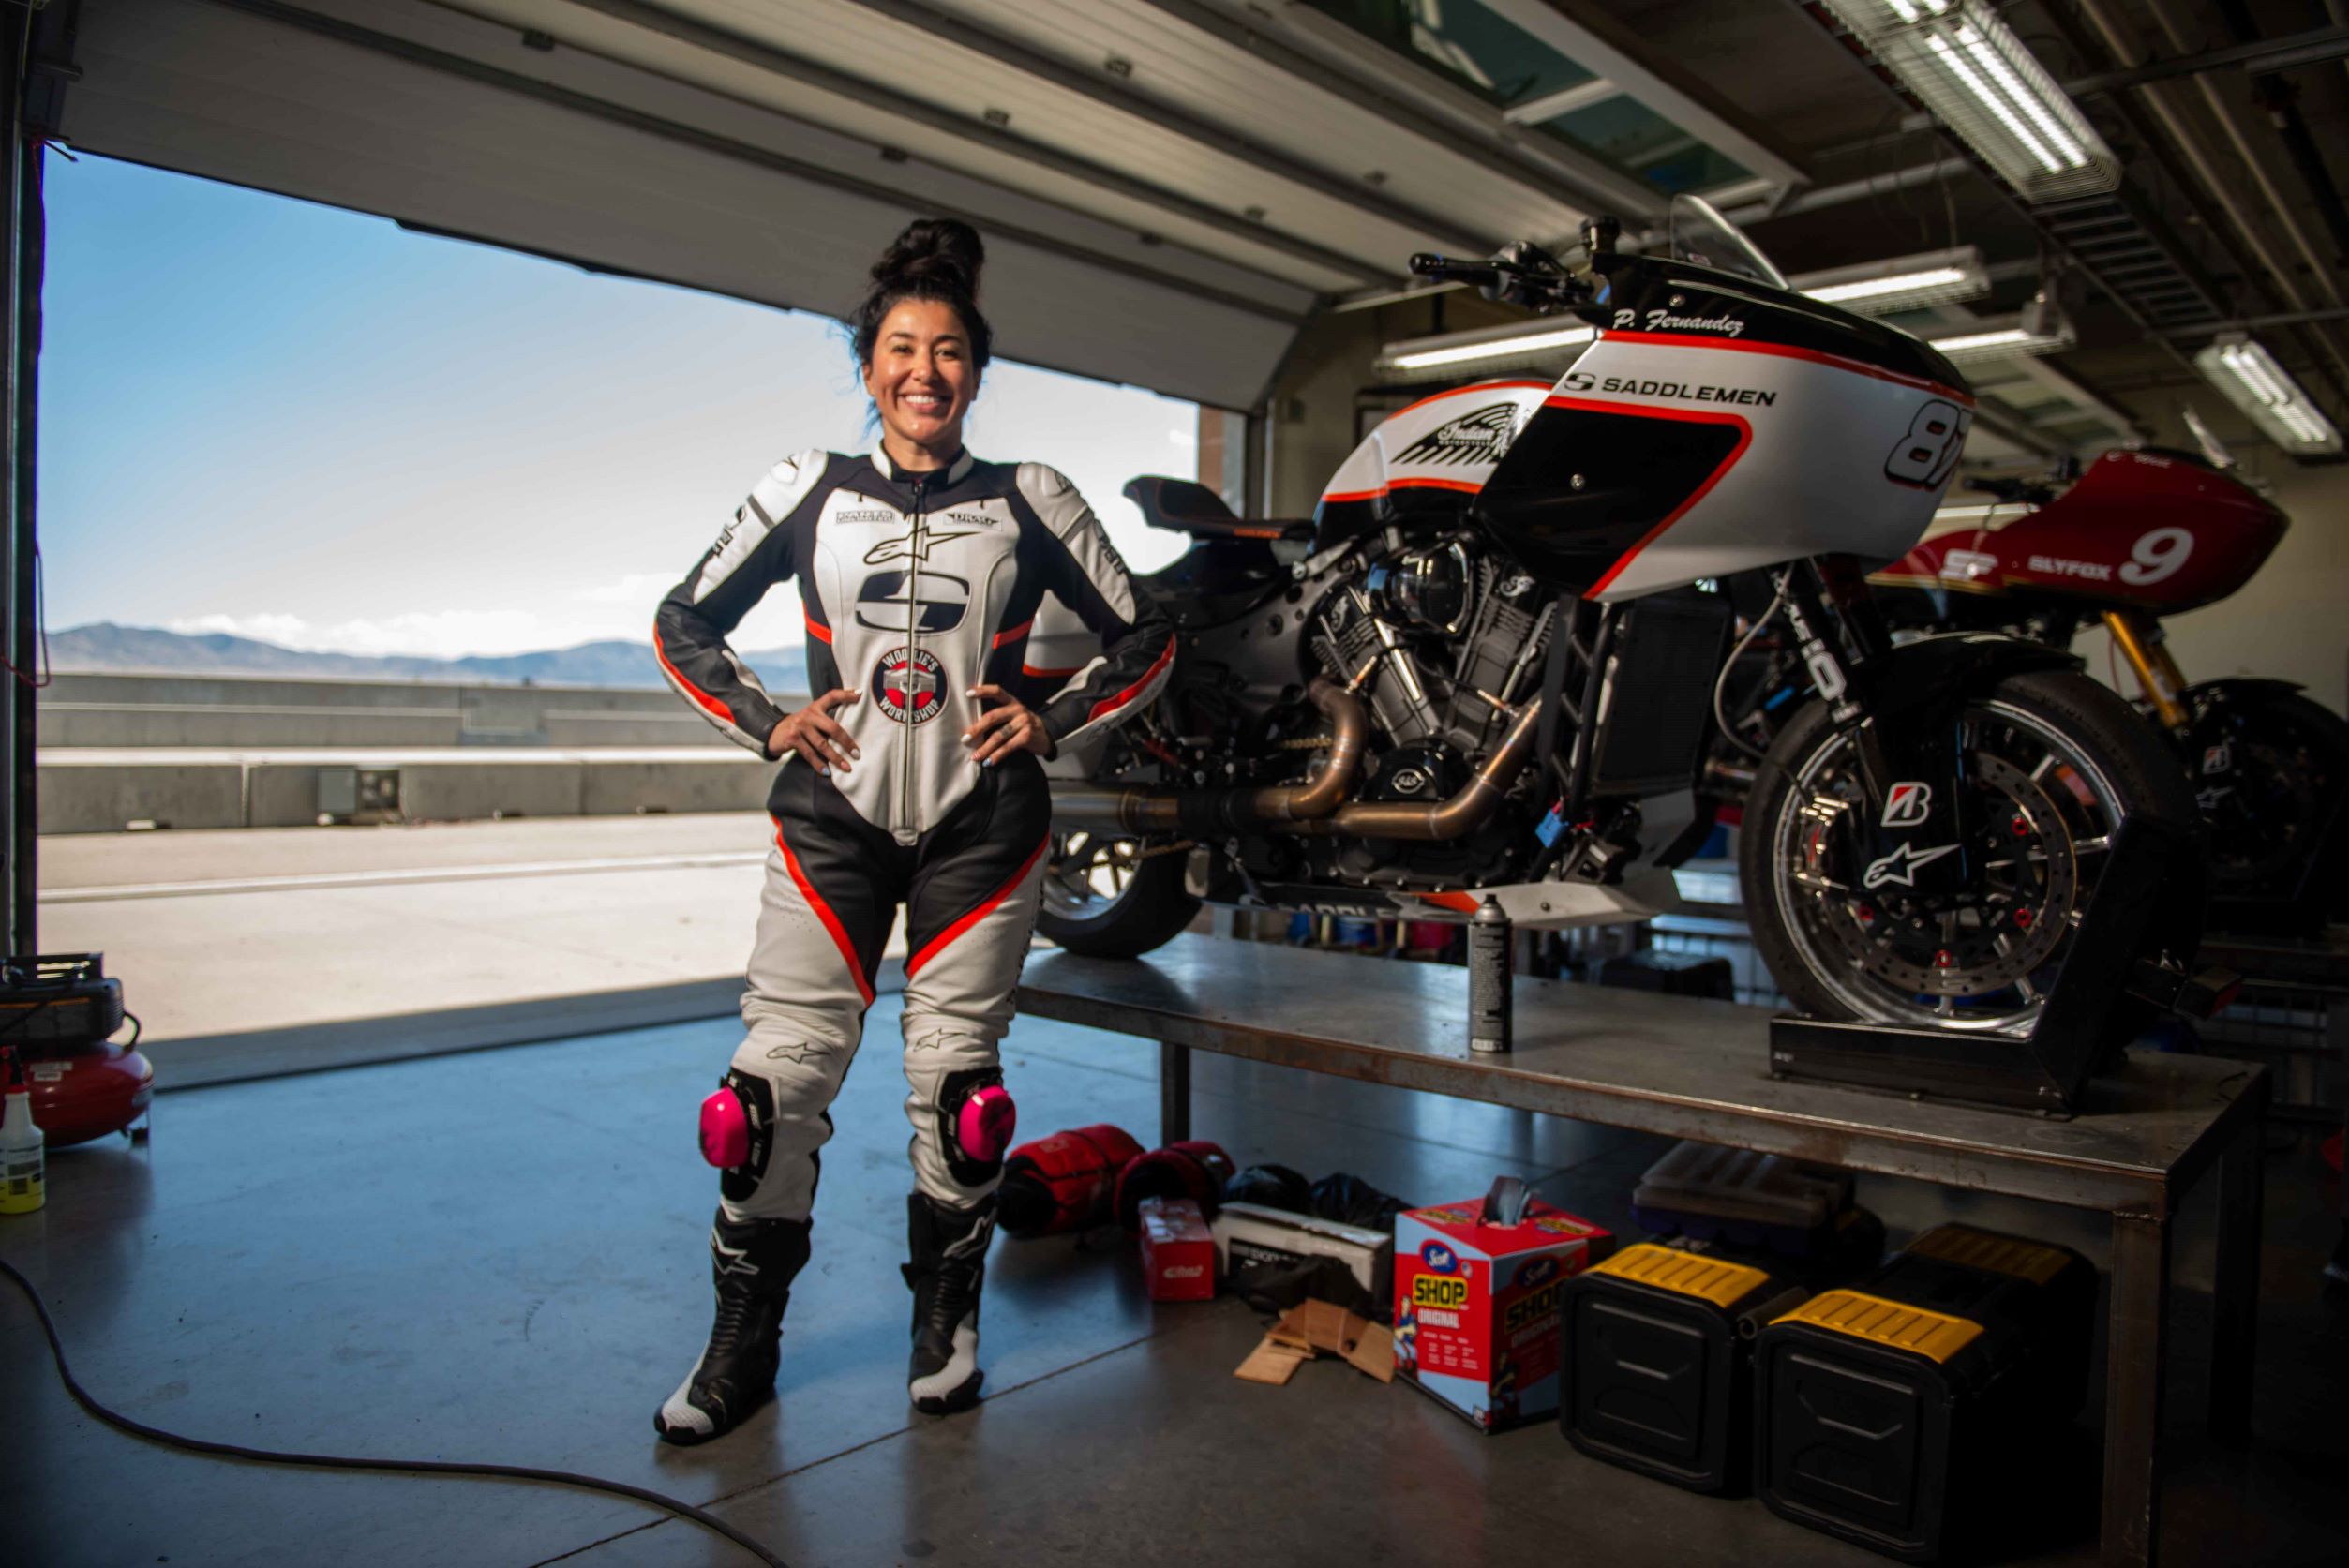 Patricia Fernandez with her Saddlemen King of the Baggers Indian Challenger in a track-side garage